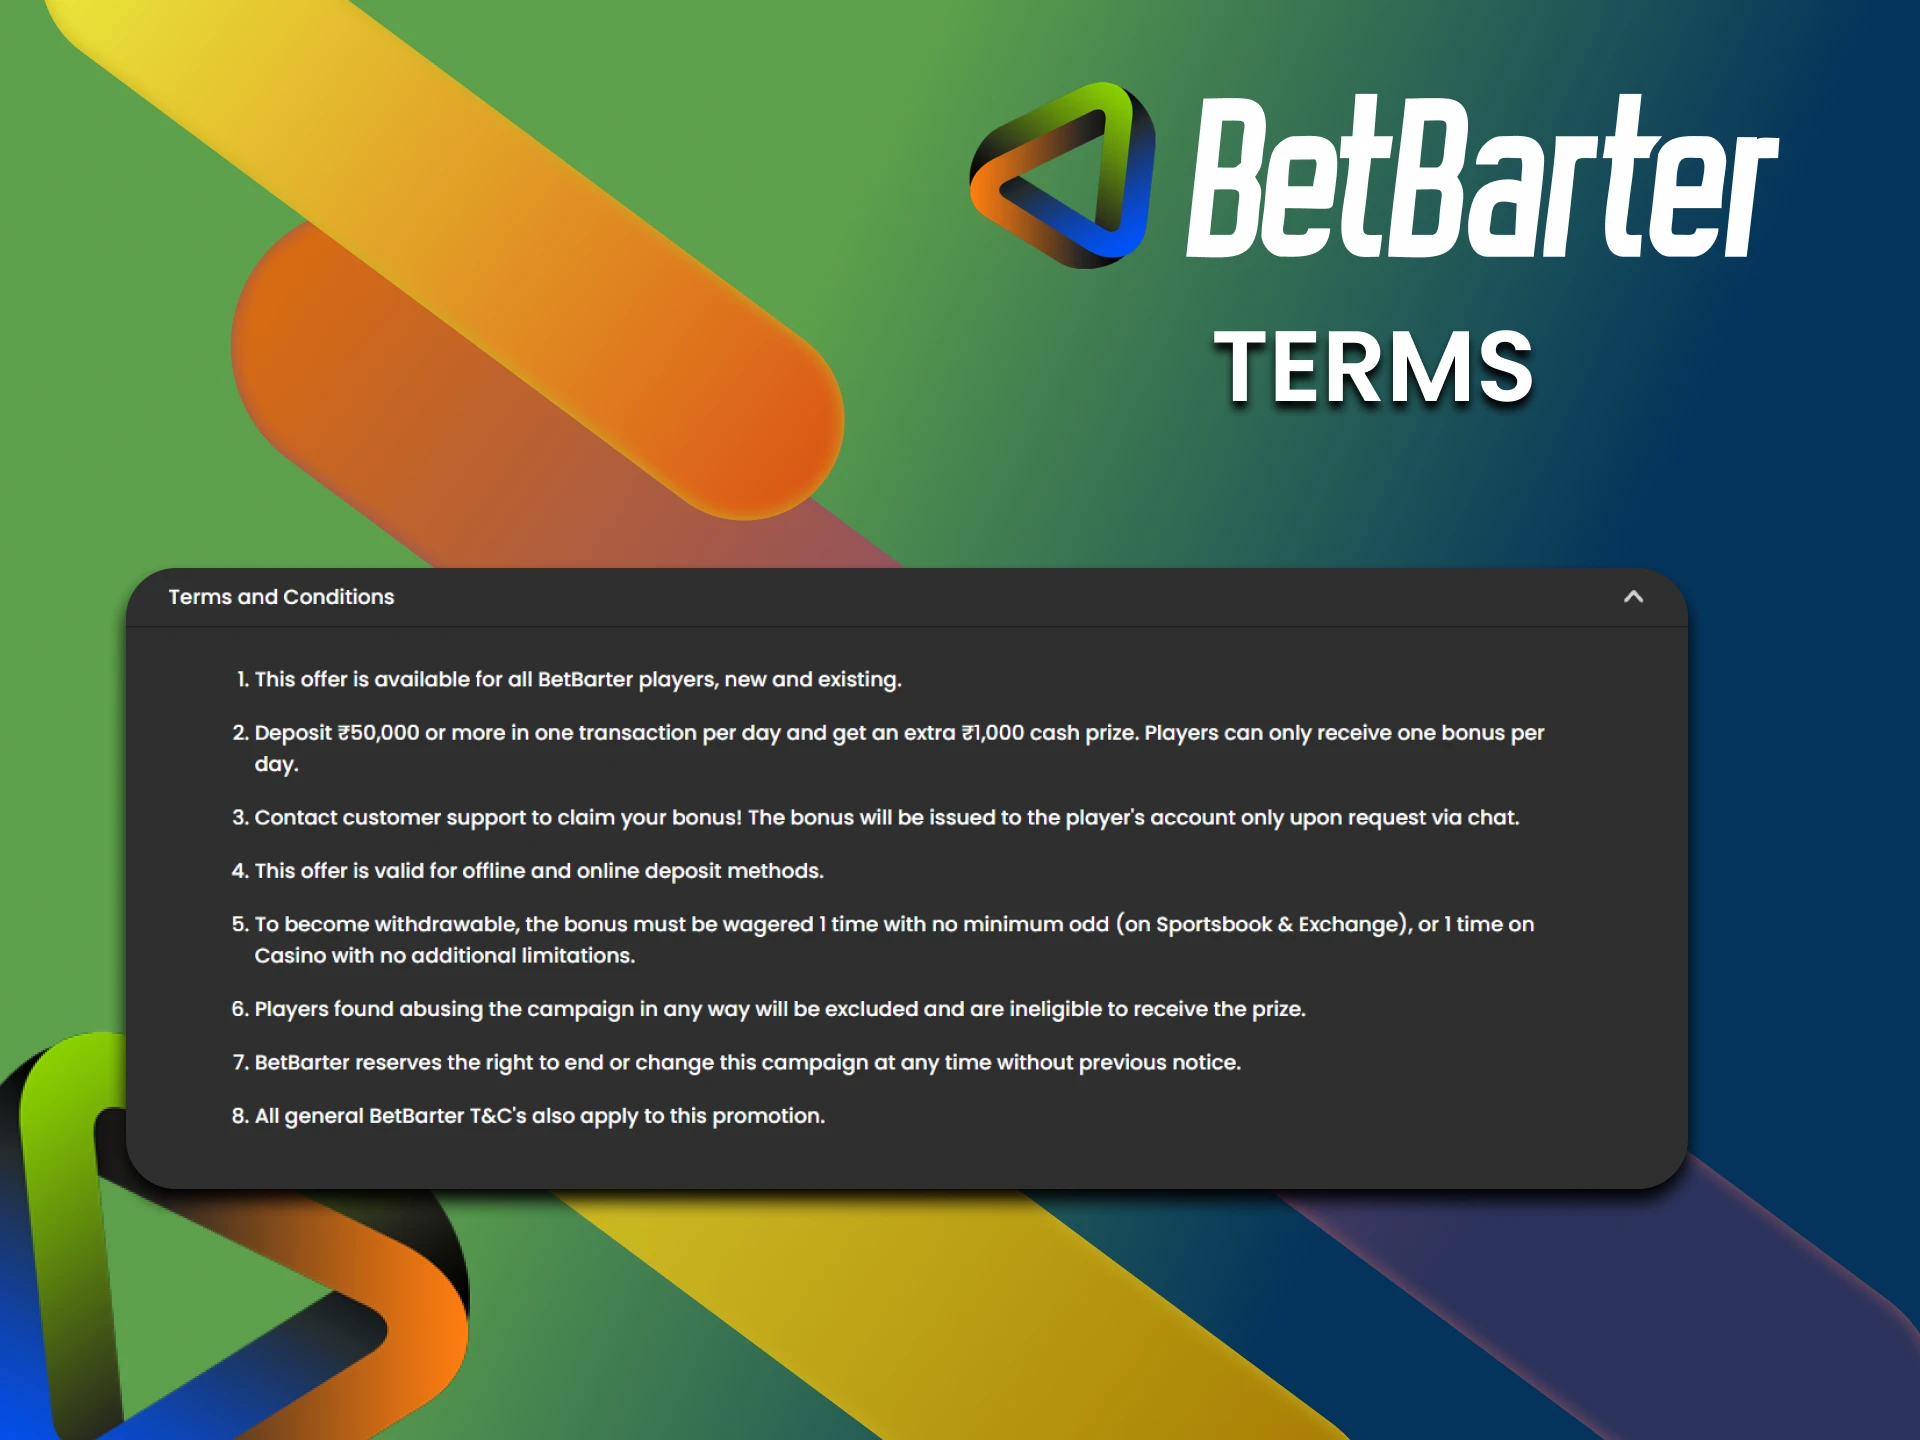 Learn the terms for bonuses on BetBarter.